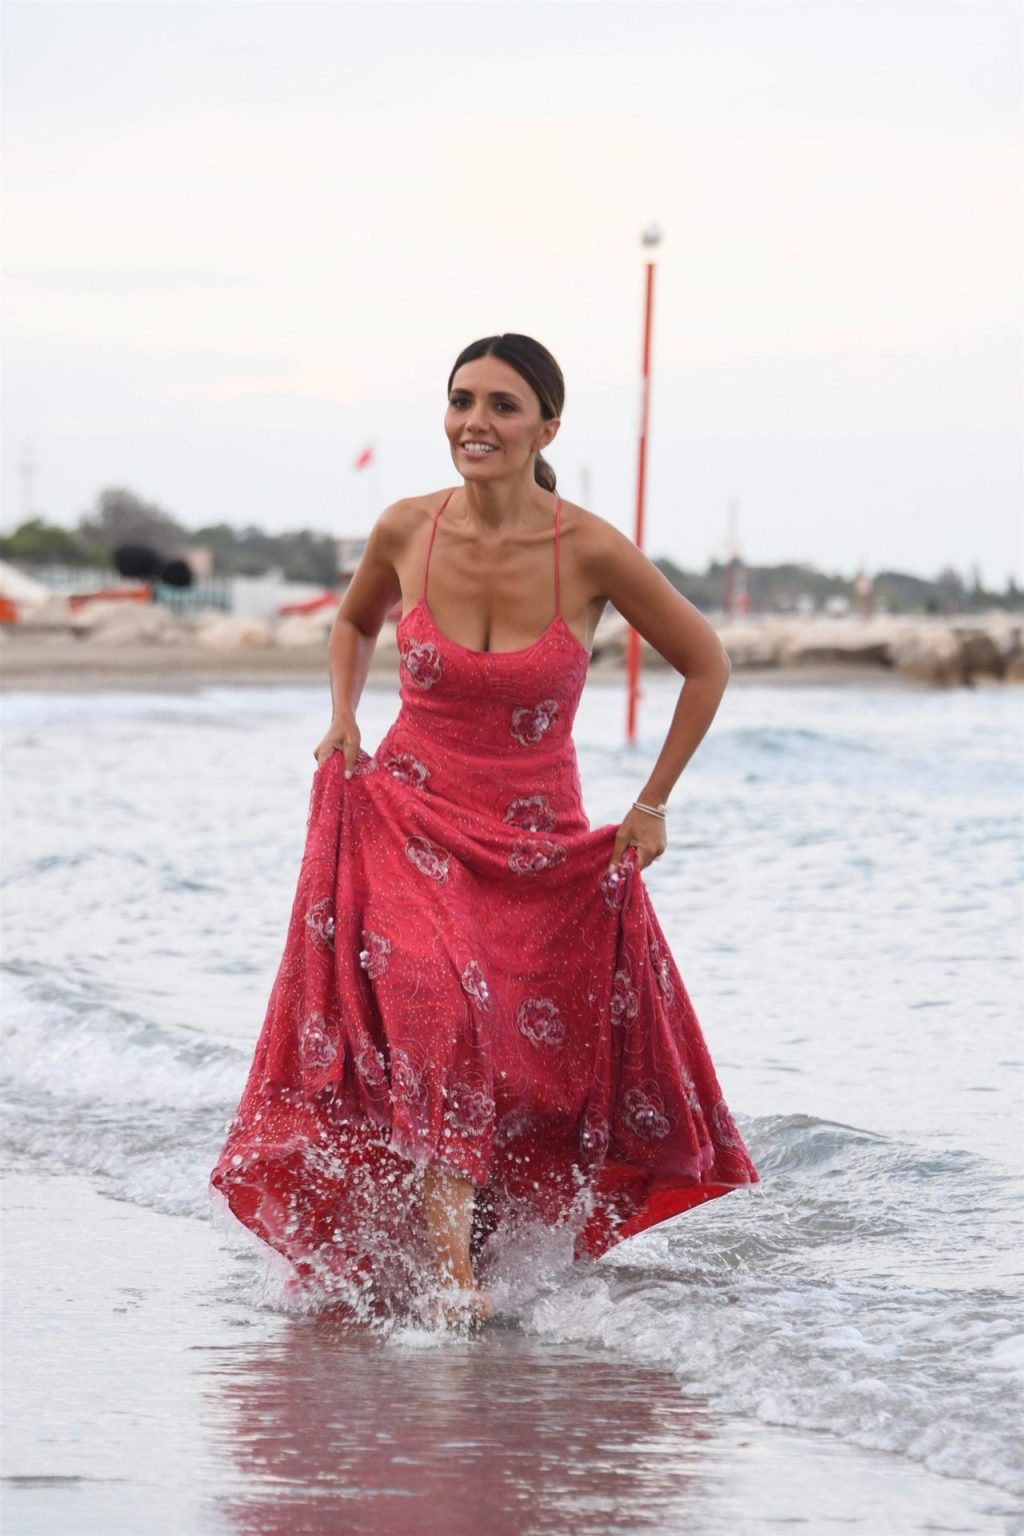 Serena Rossi Poses for Photographers at Lido Beach in Venice (115 Photos)